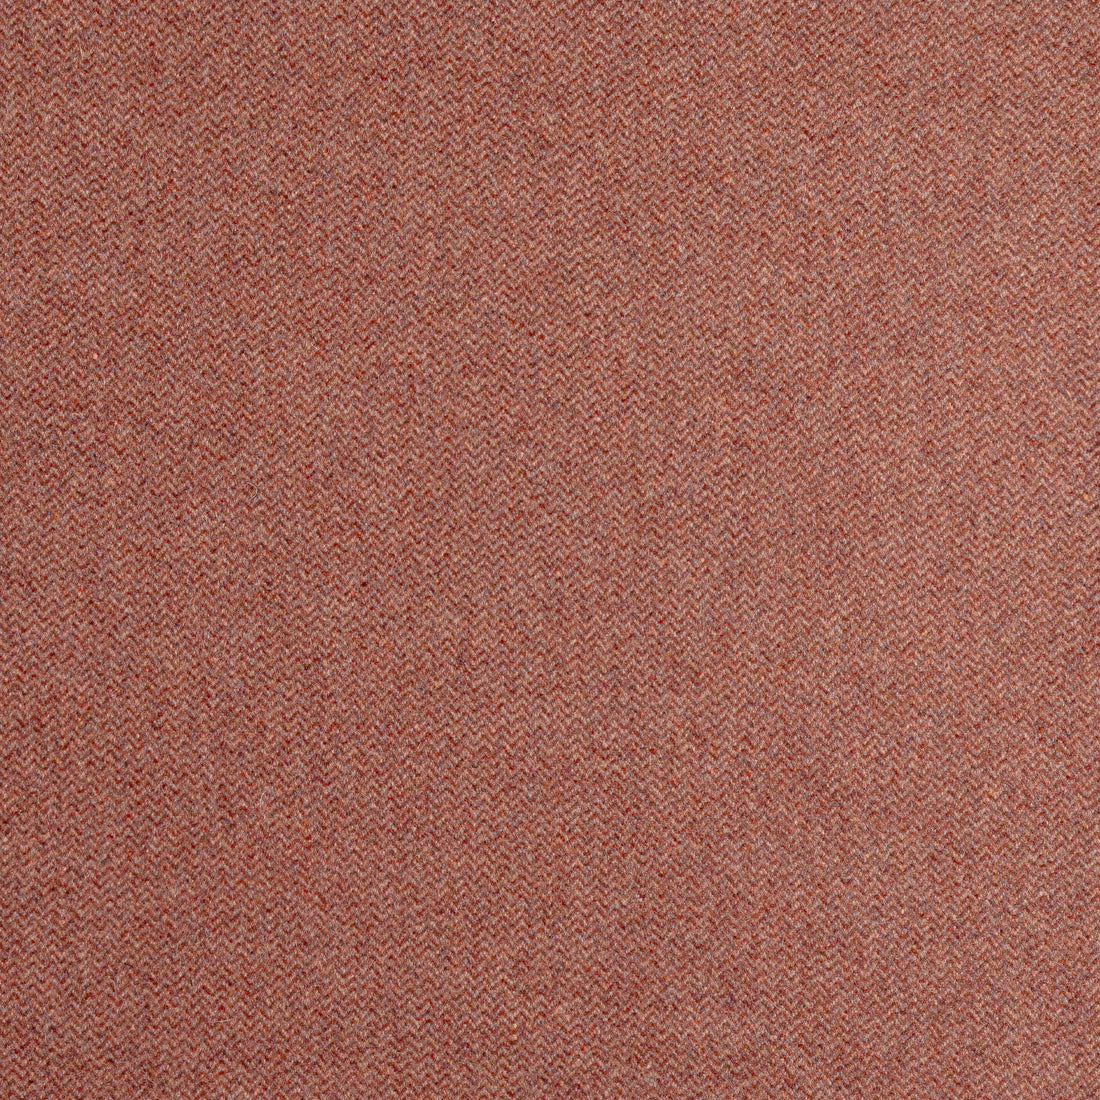 Dorset fabric in cinnabar color - pattern number W80903 - by Thibaut in the Dunmore collection